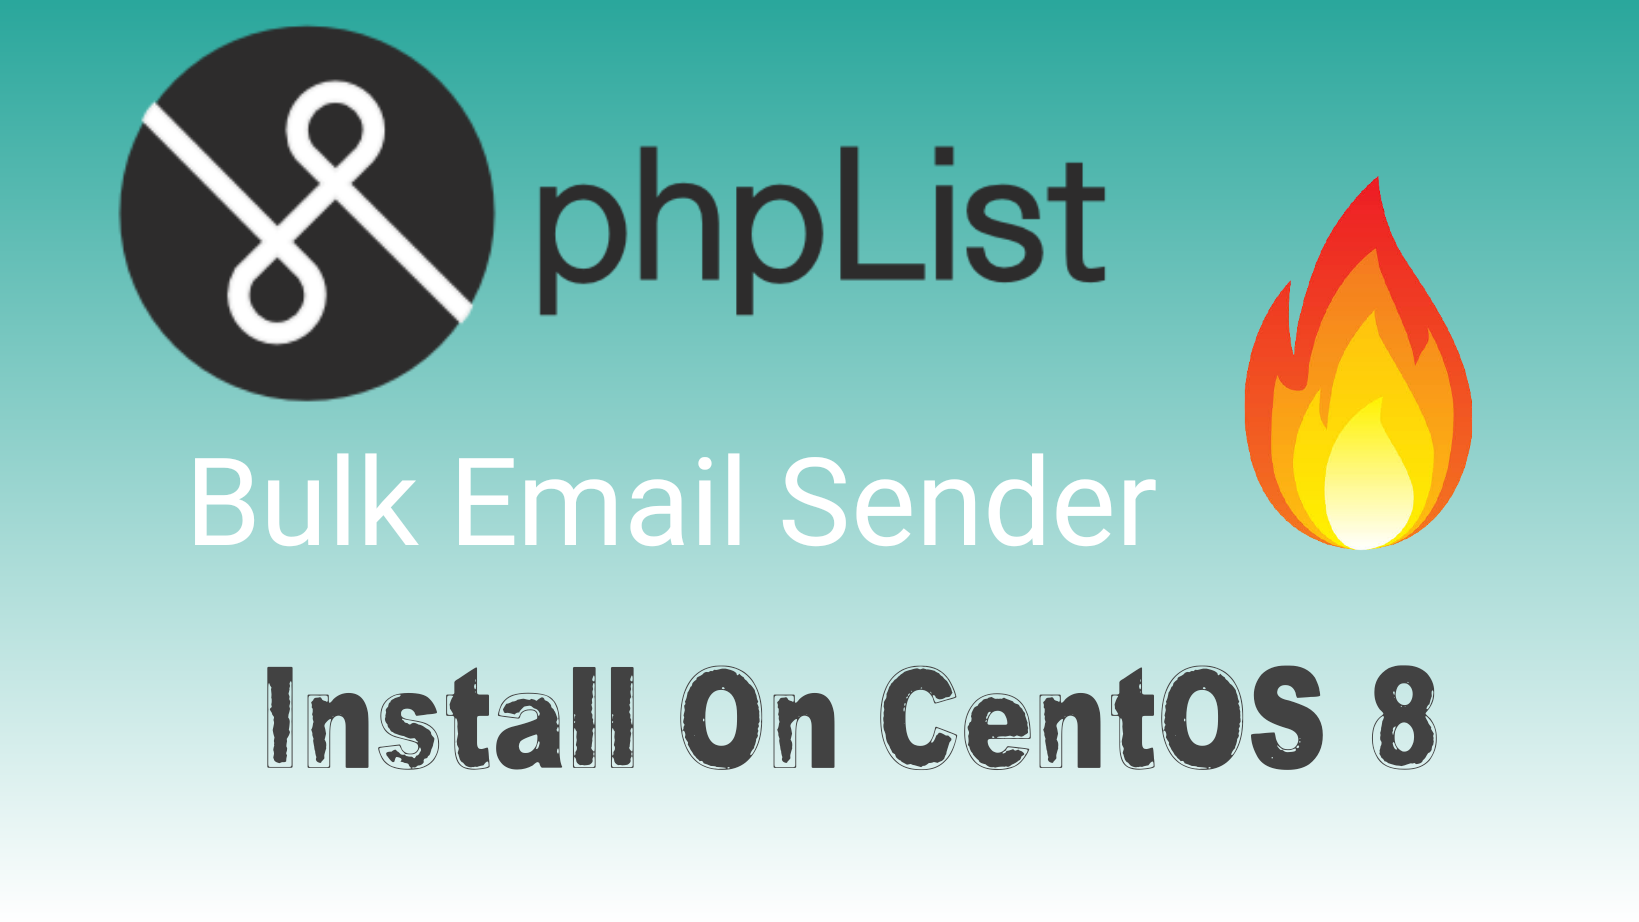 How To Install And Configure phpList in CentOS